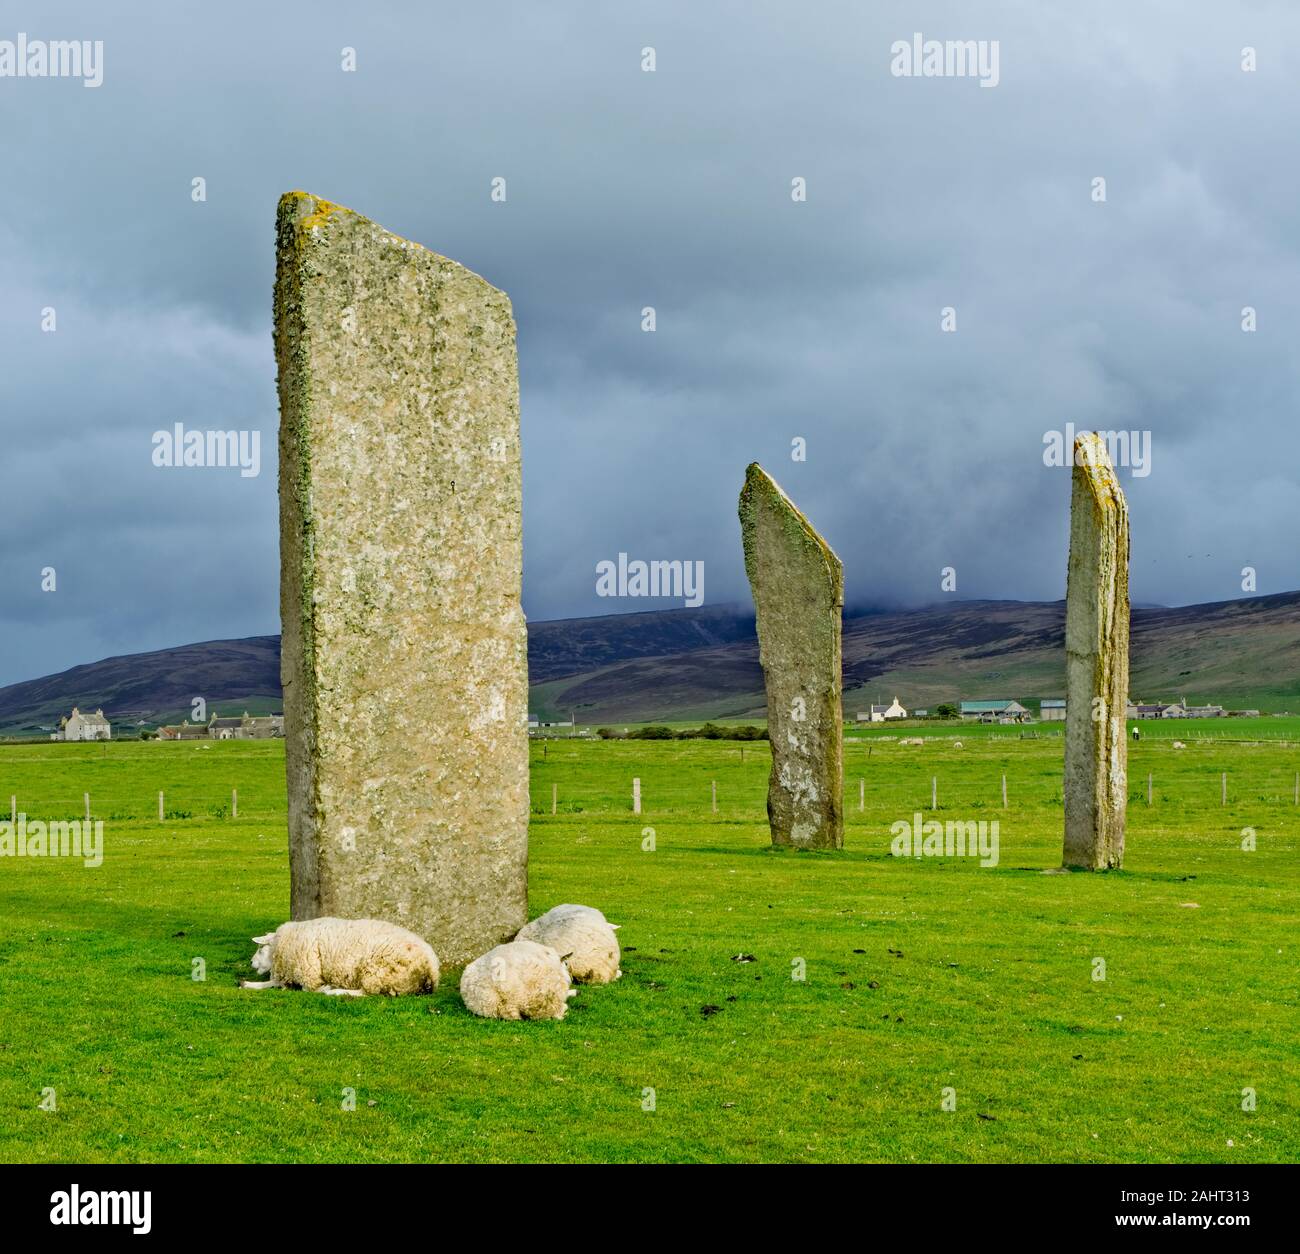 Sheep nestled at the base of a menhir at the Standing Stones of Stenness Stock Photo